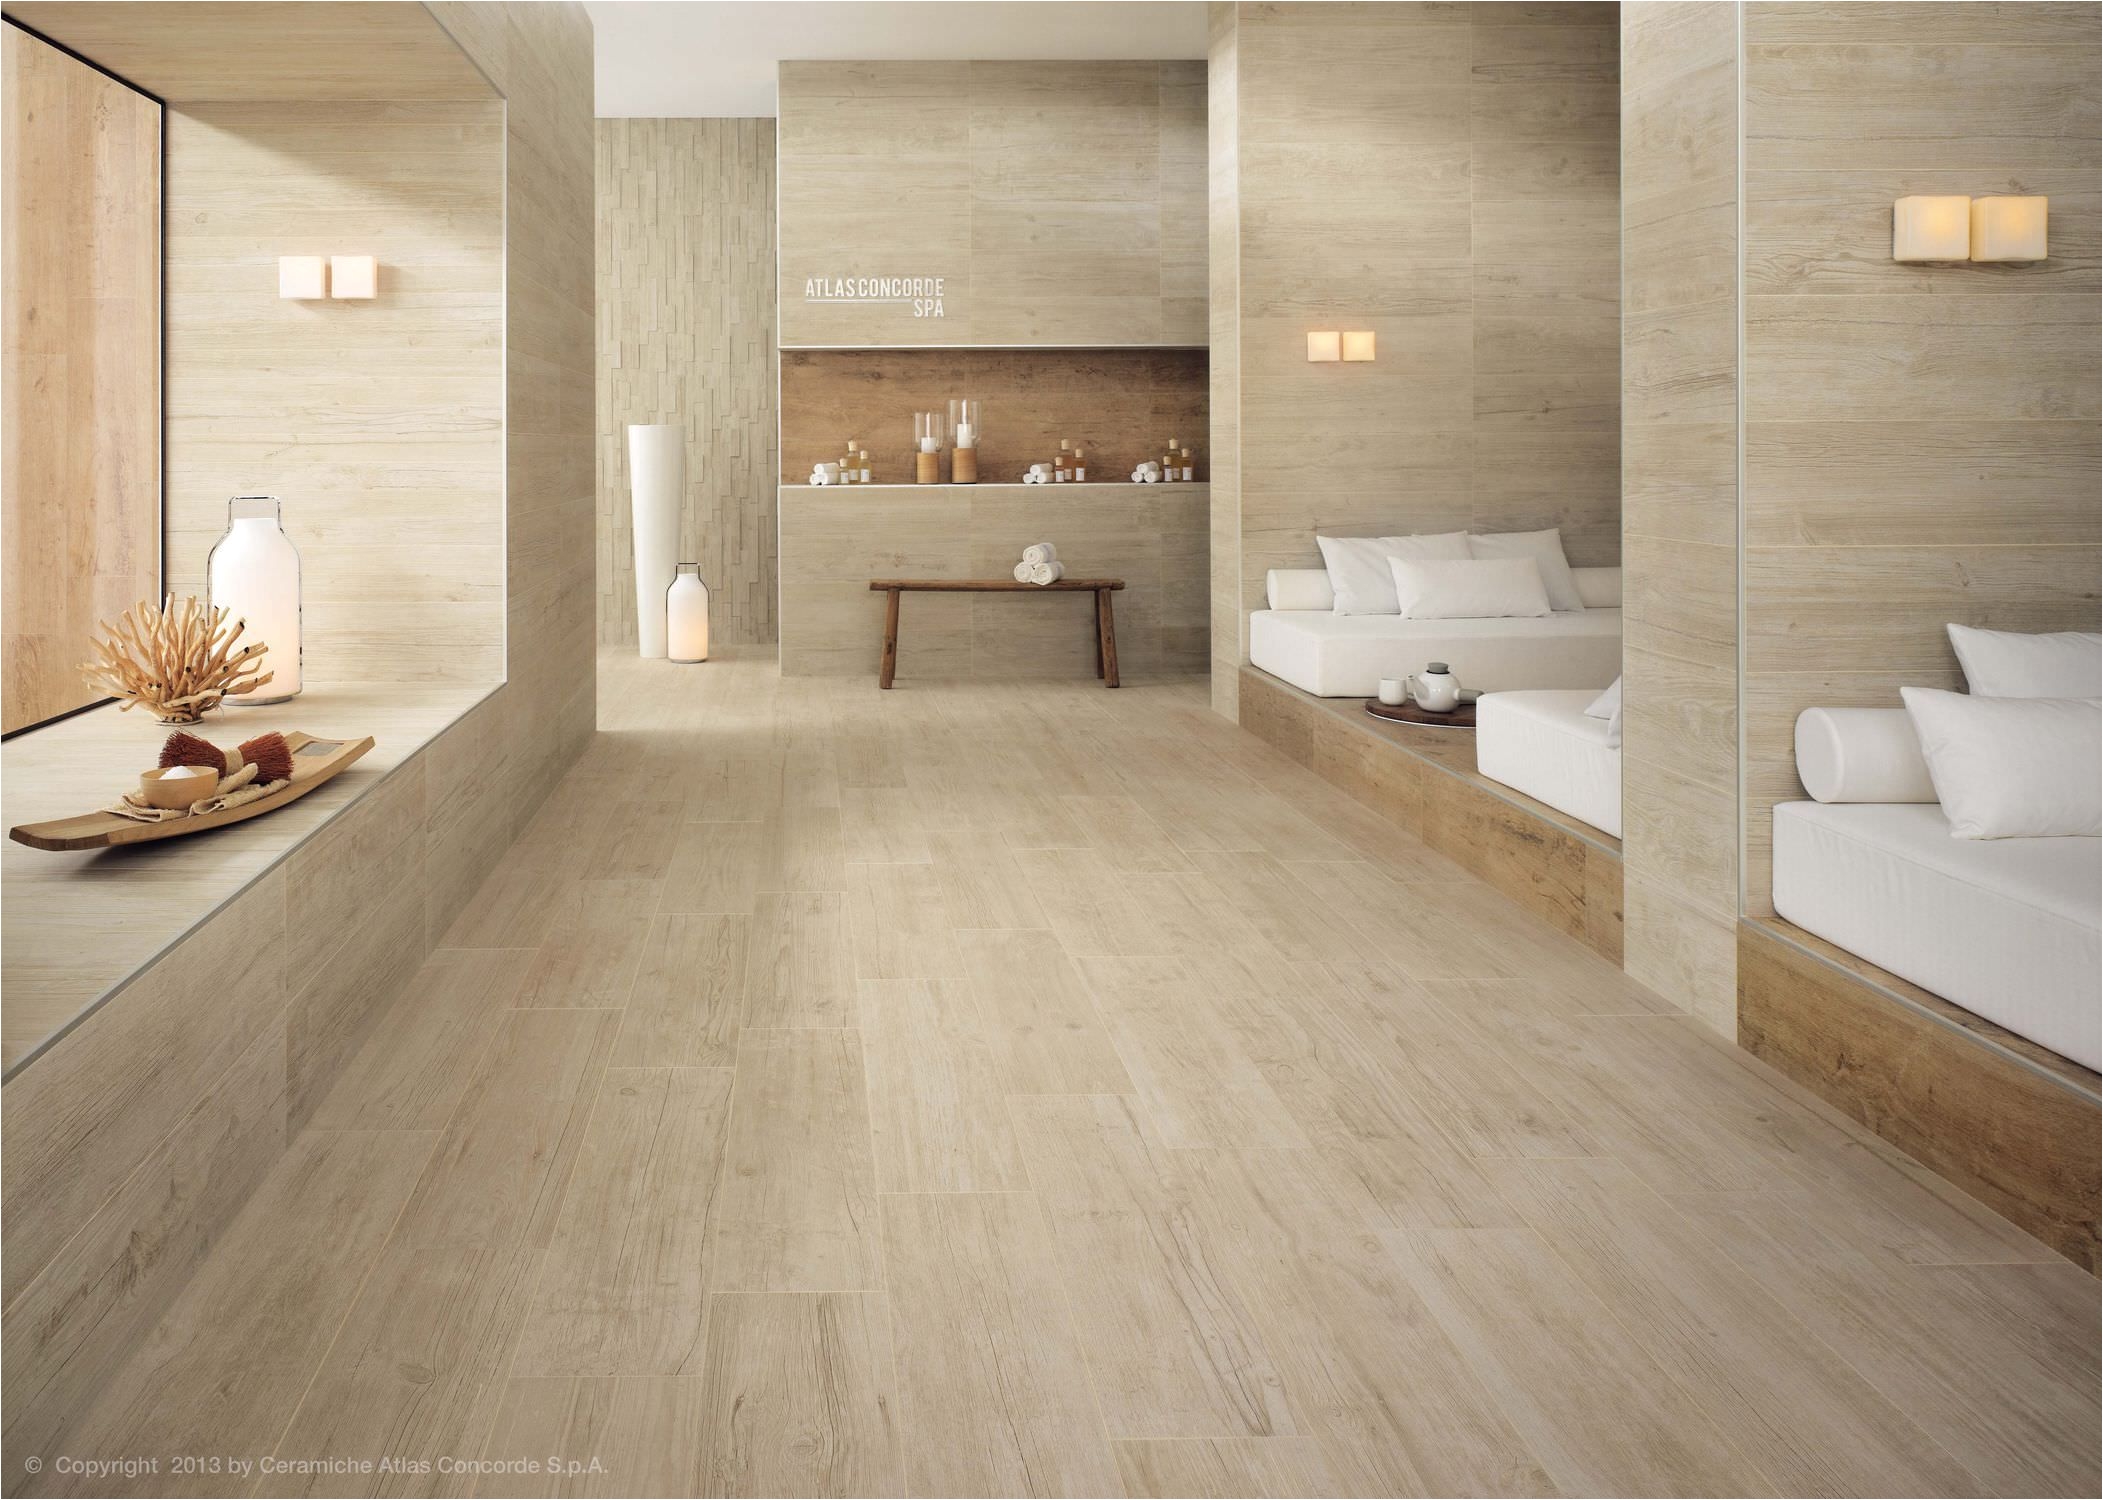 atlas concorde axi series is wood look porcelain tiles for floors that interpret the natural materials marked by time